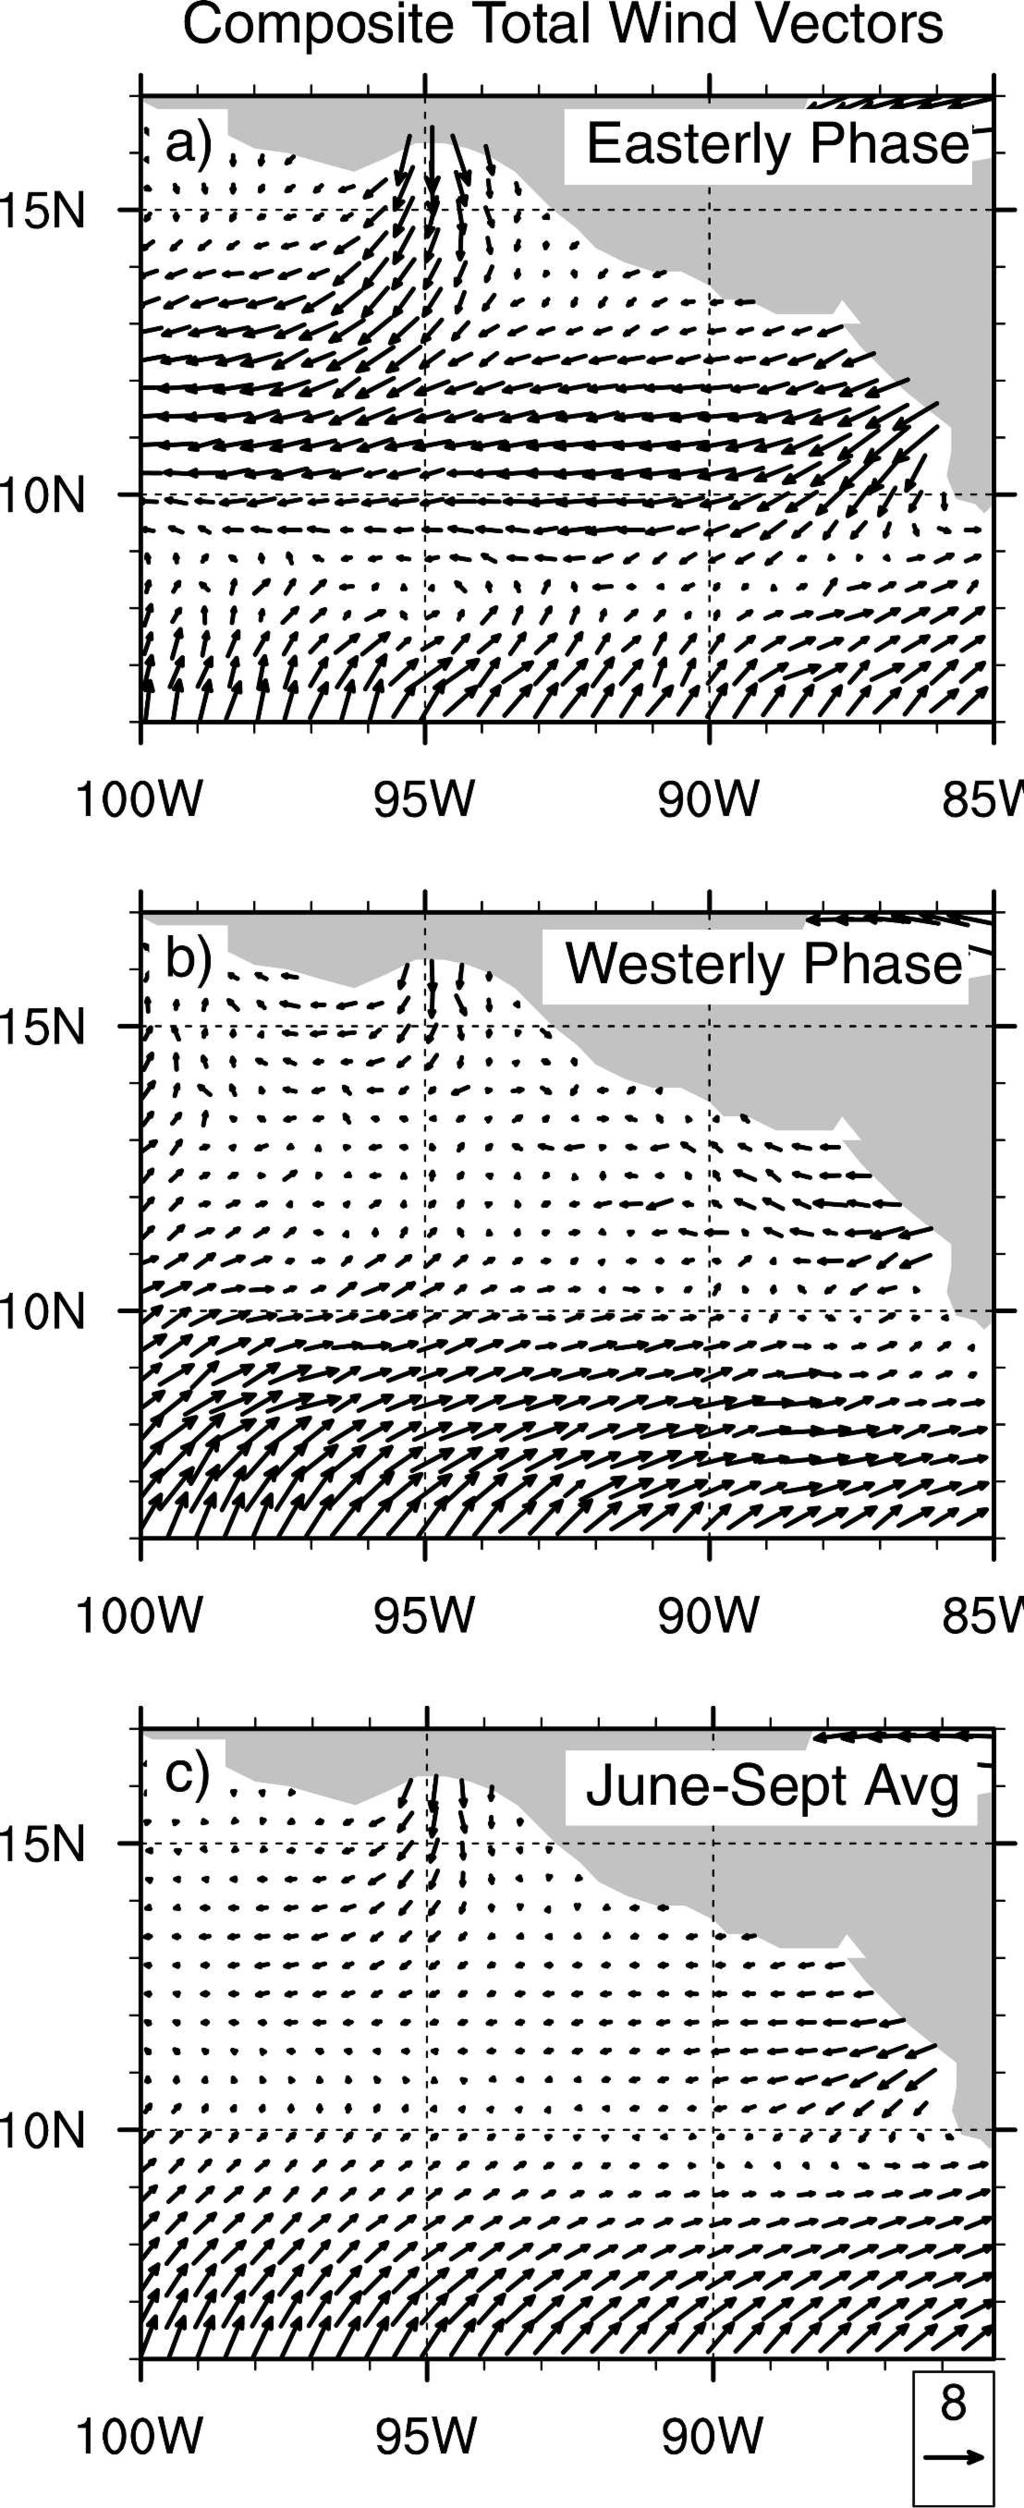 JANUARY 2007 M A L O N E Y A N D E S B E N S E N 17 FIG. 12. Composite unfiltered wind vectors for (a) easterly and (b) westerly ISO events. (c) June September 2000 03 mean wind vectors.